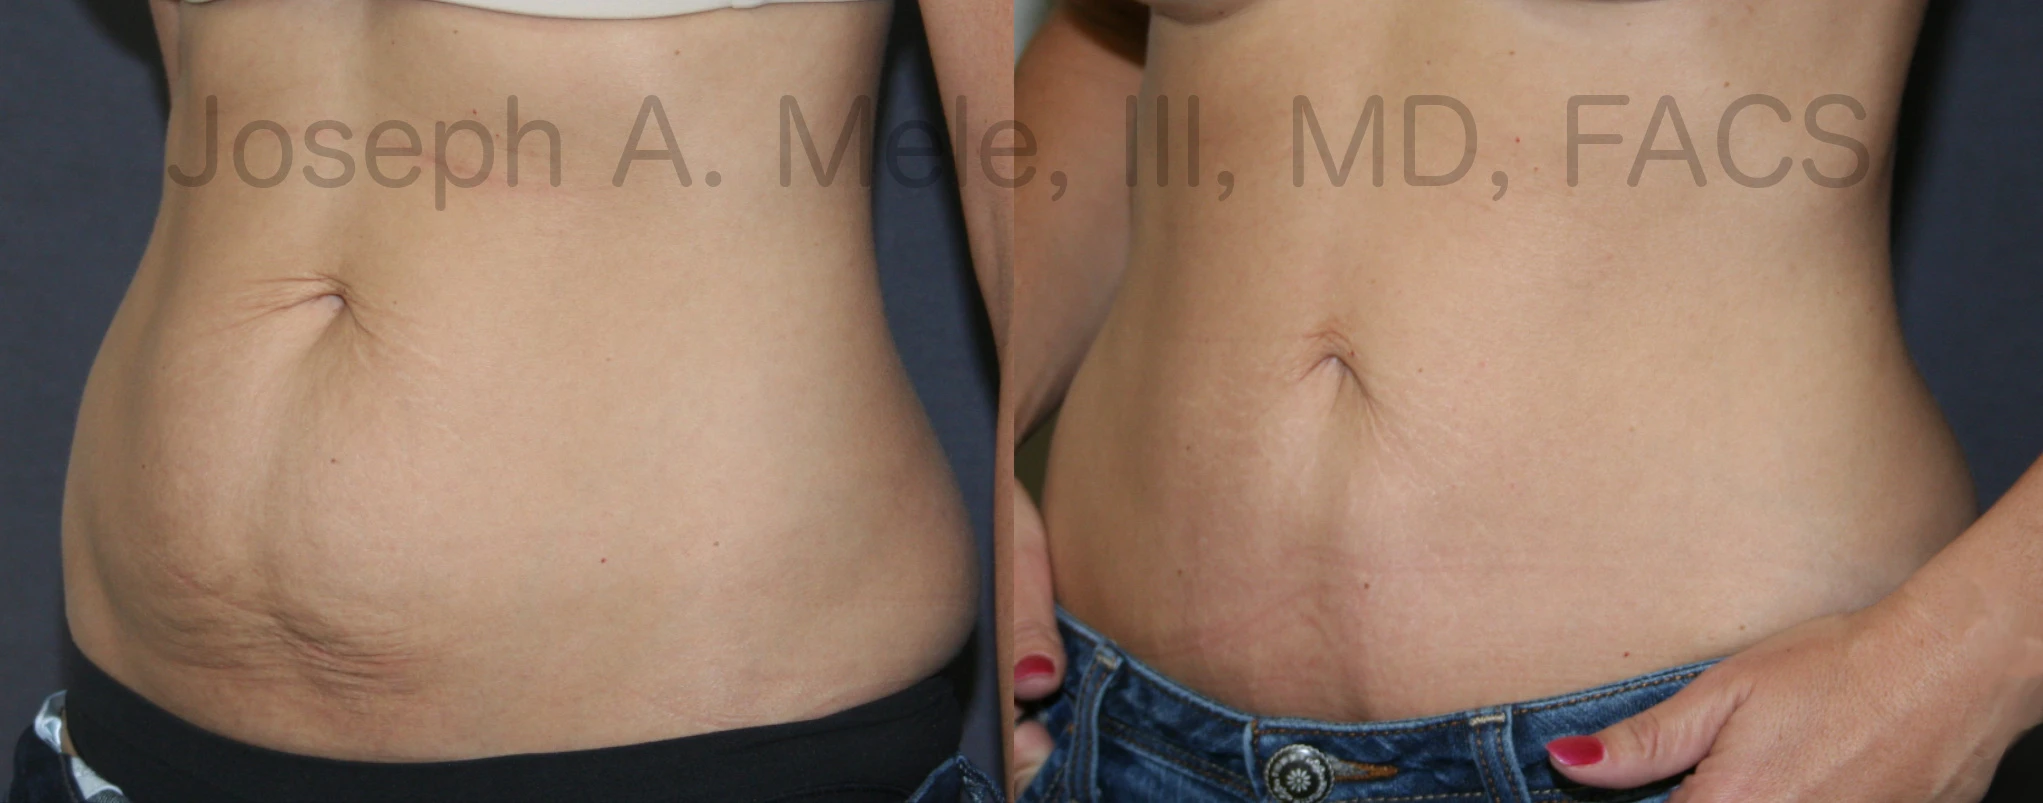 Best Tummy Tuck Before and After -100% Safe & Secure Surgery